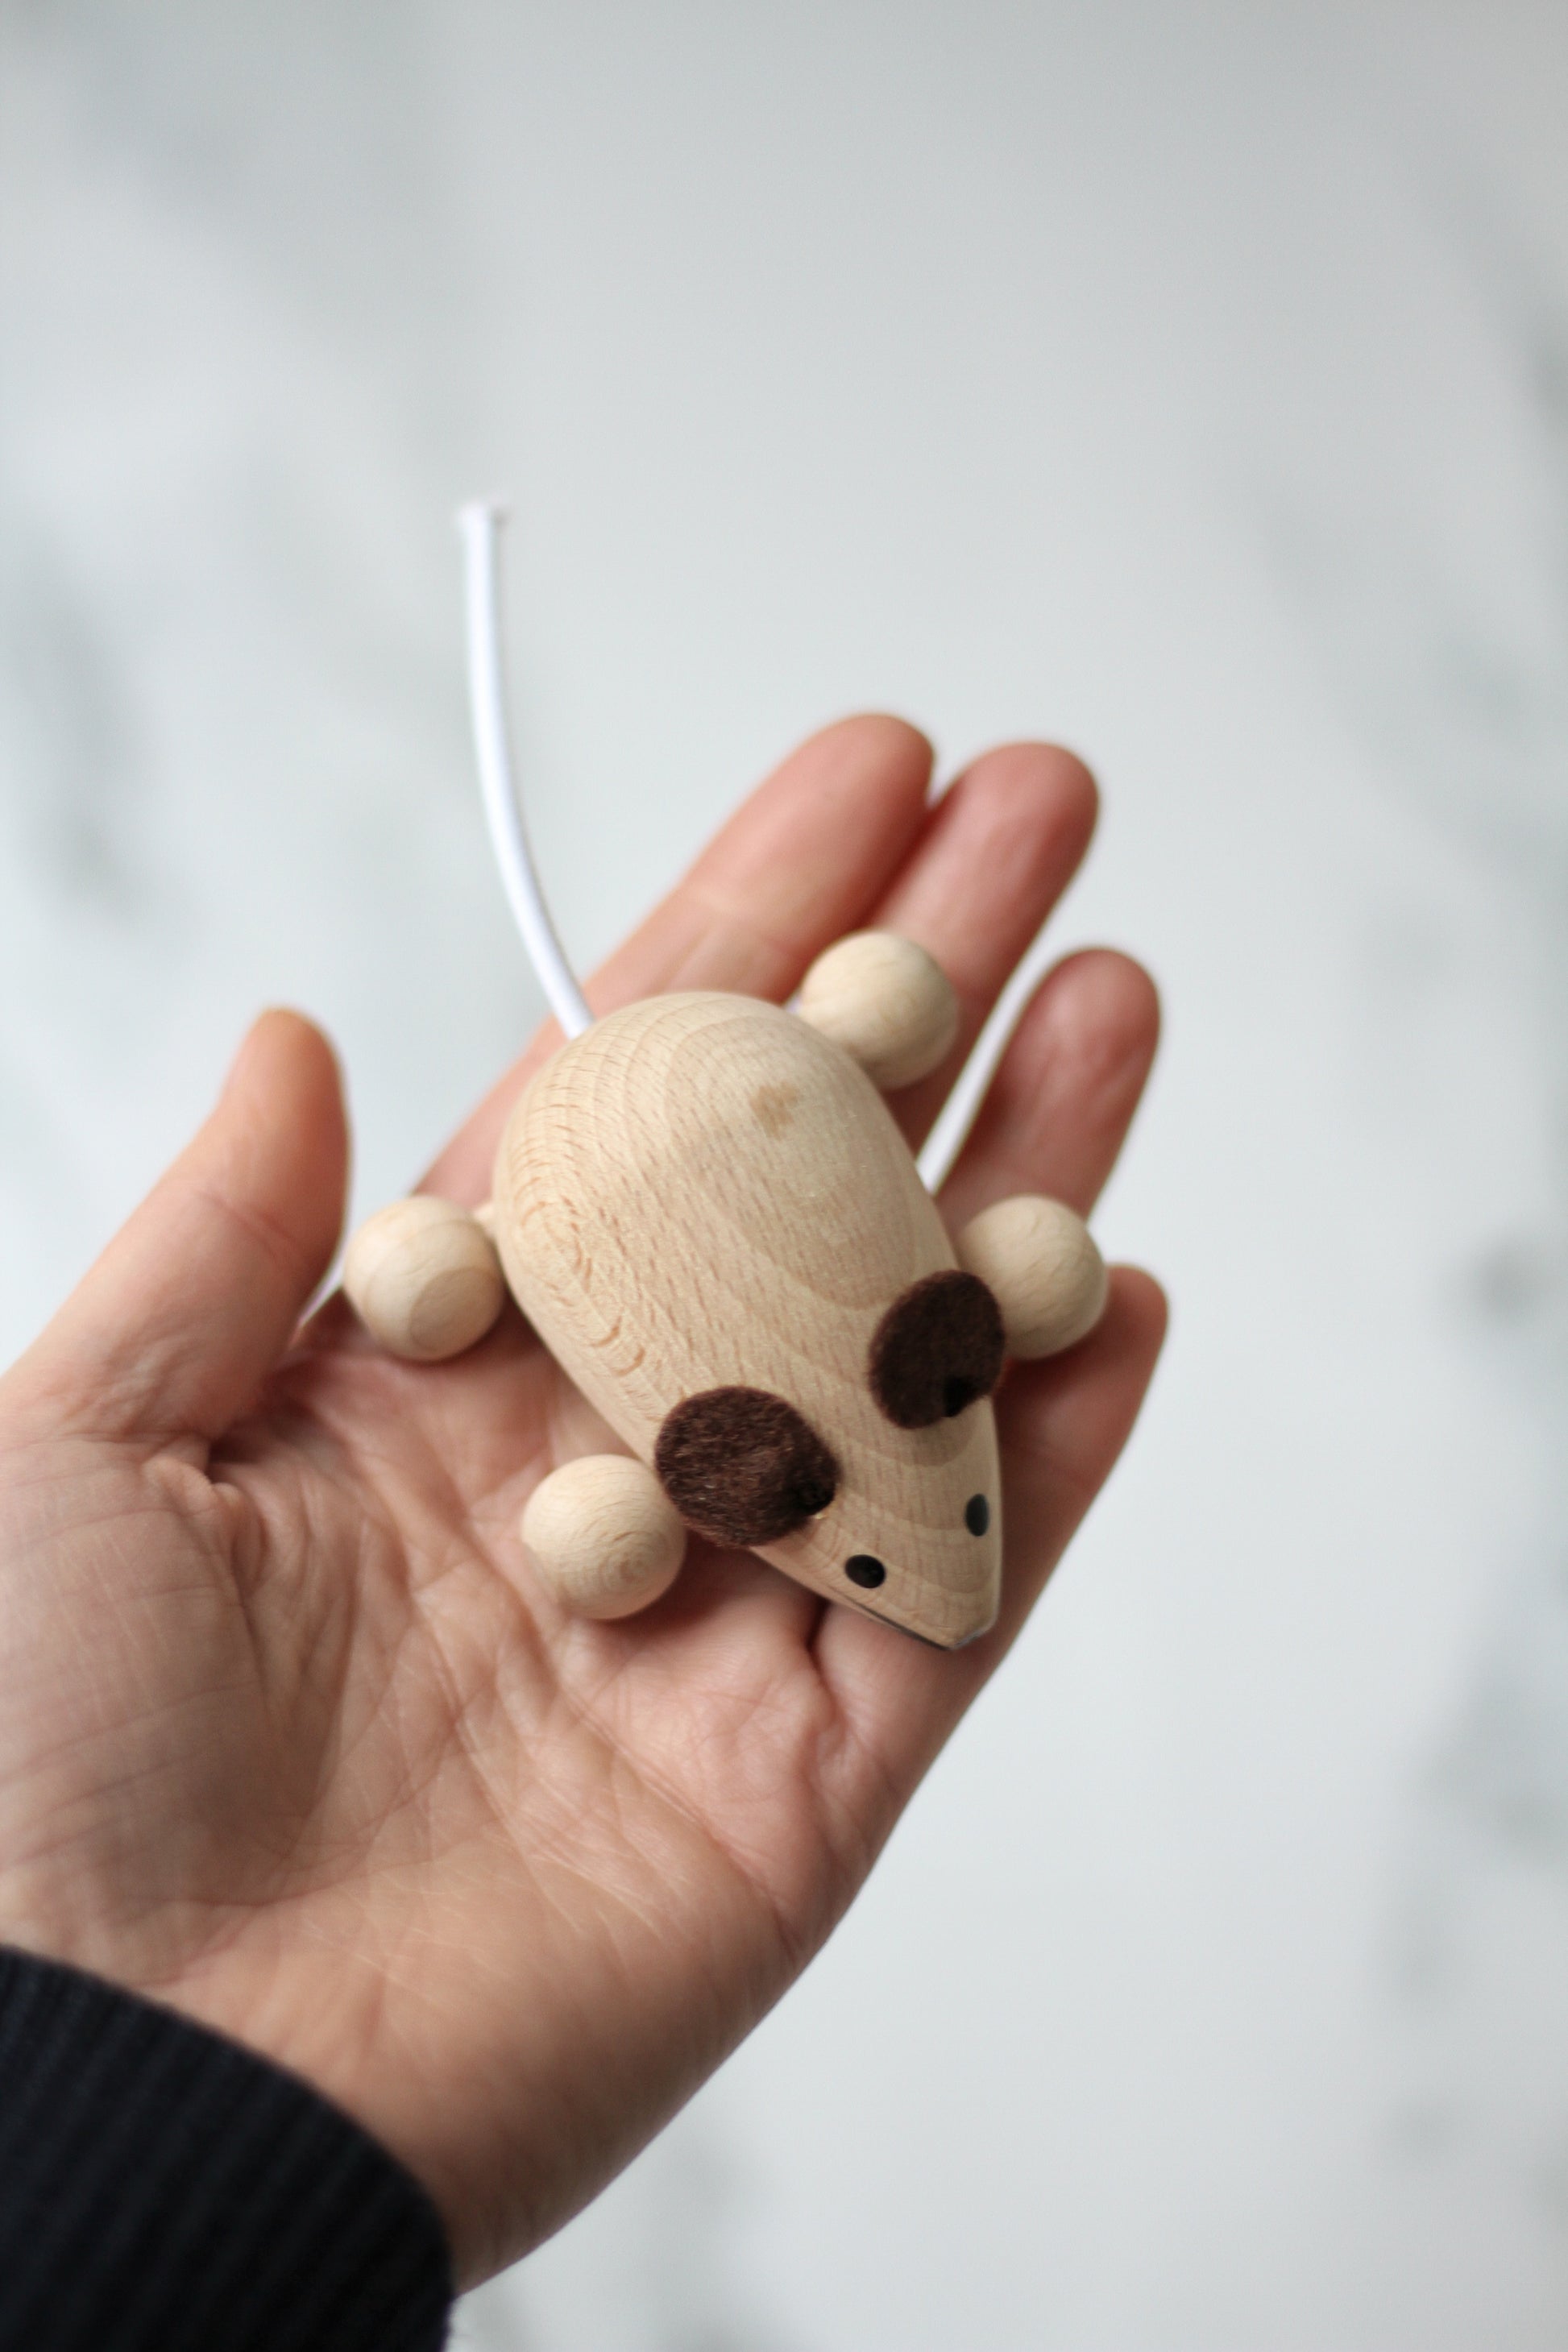 small wooden mouse toy with weels